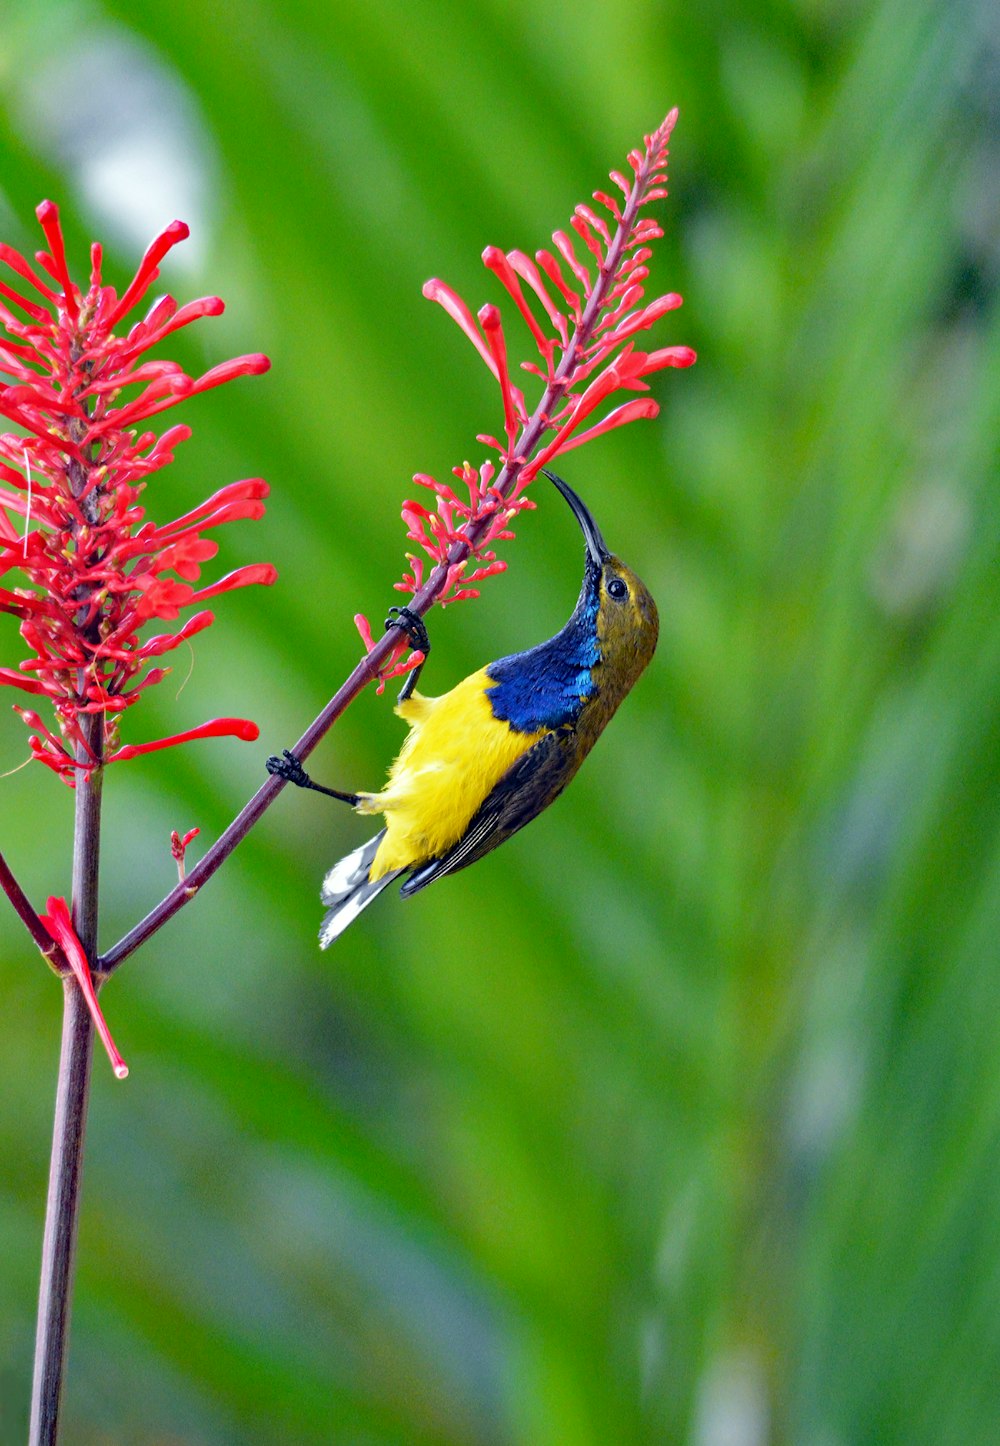 macro photography of brown, blue, and yellow long-beaked bird on red petaled flower